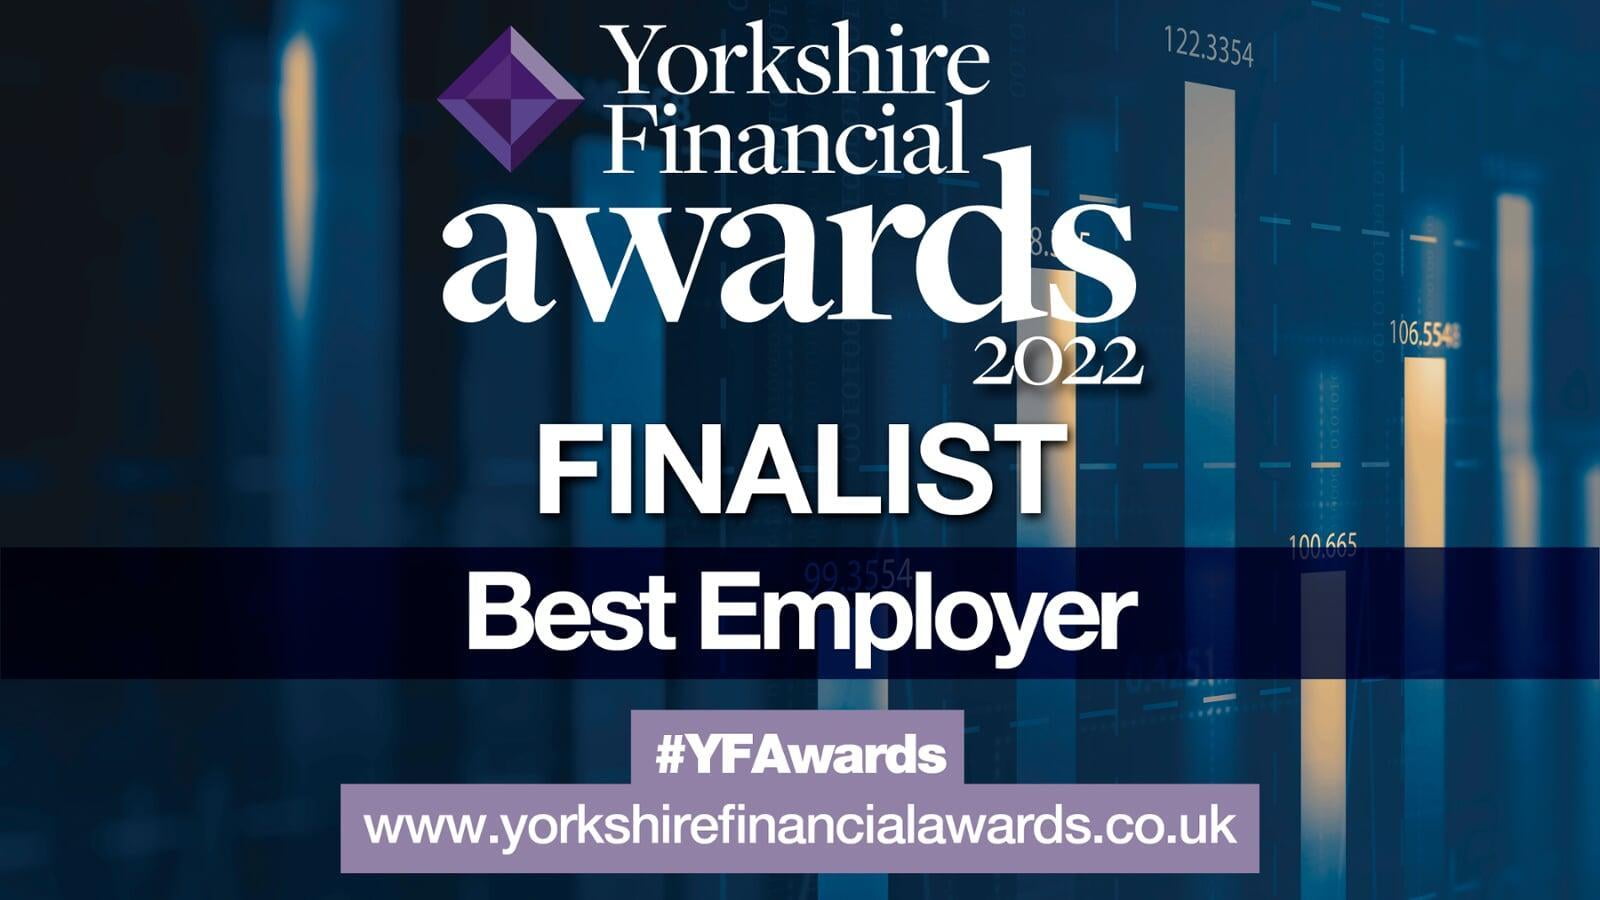 Tenet shortlisted for ‘Best Employer’ award at 2022 Yorkshire Financial Awards